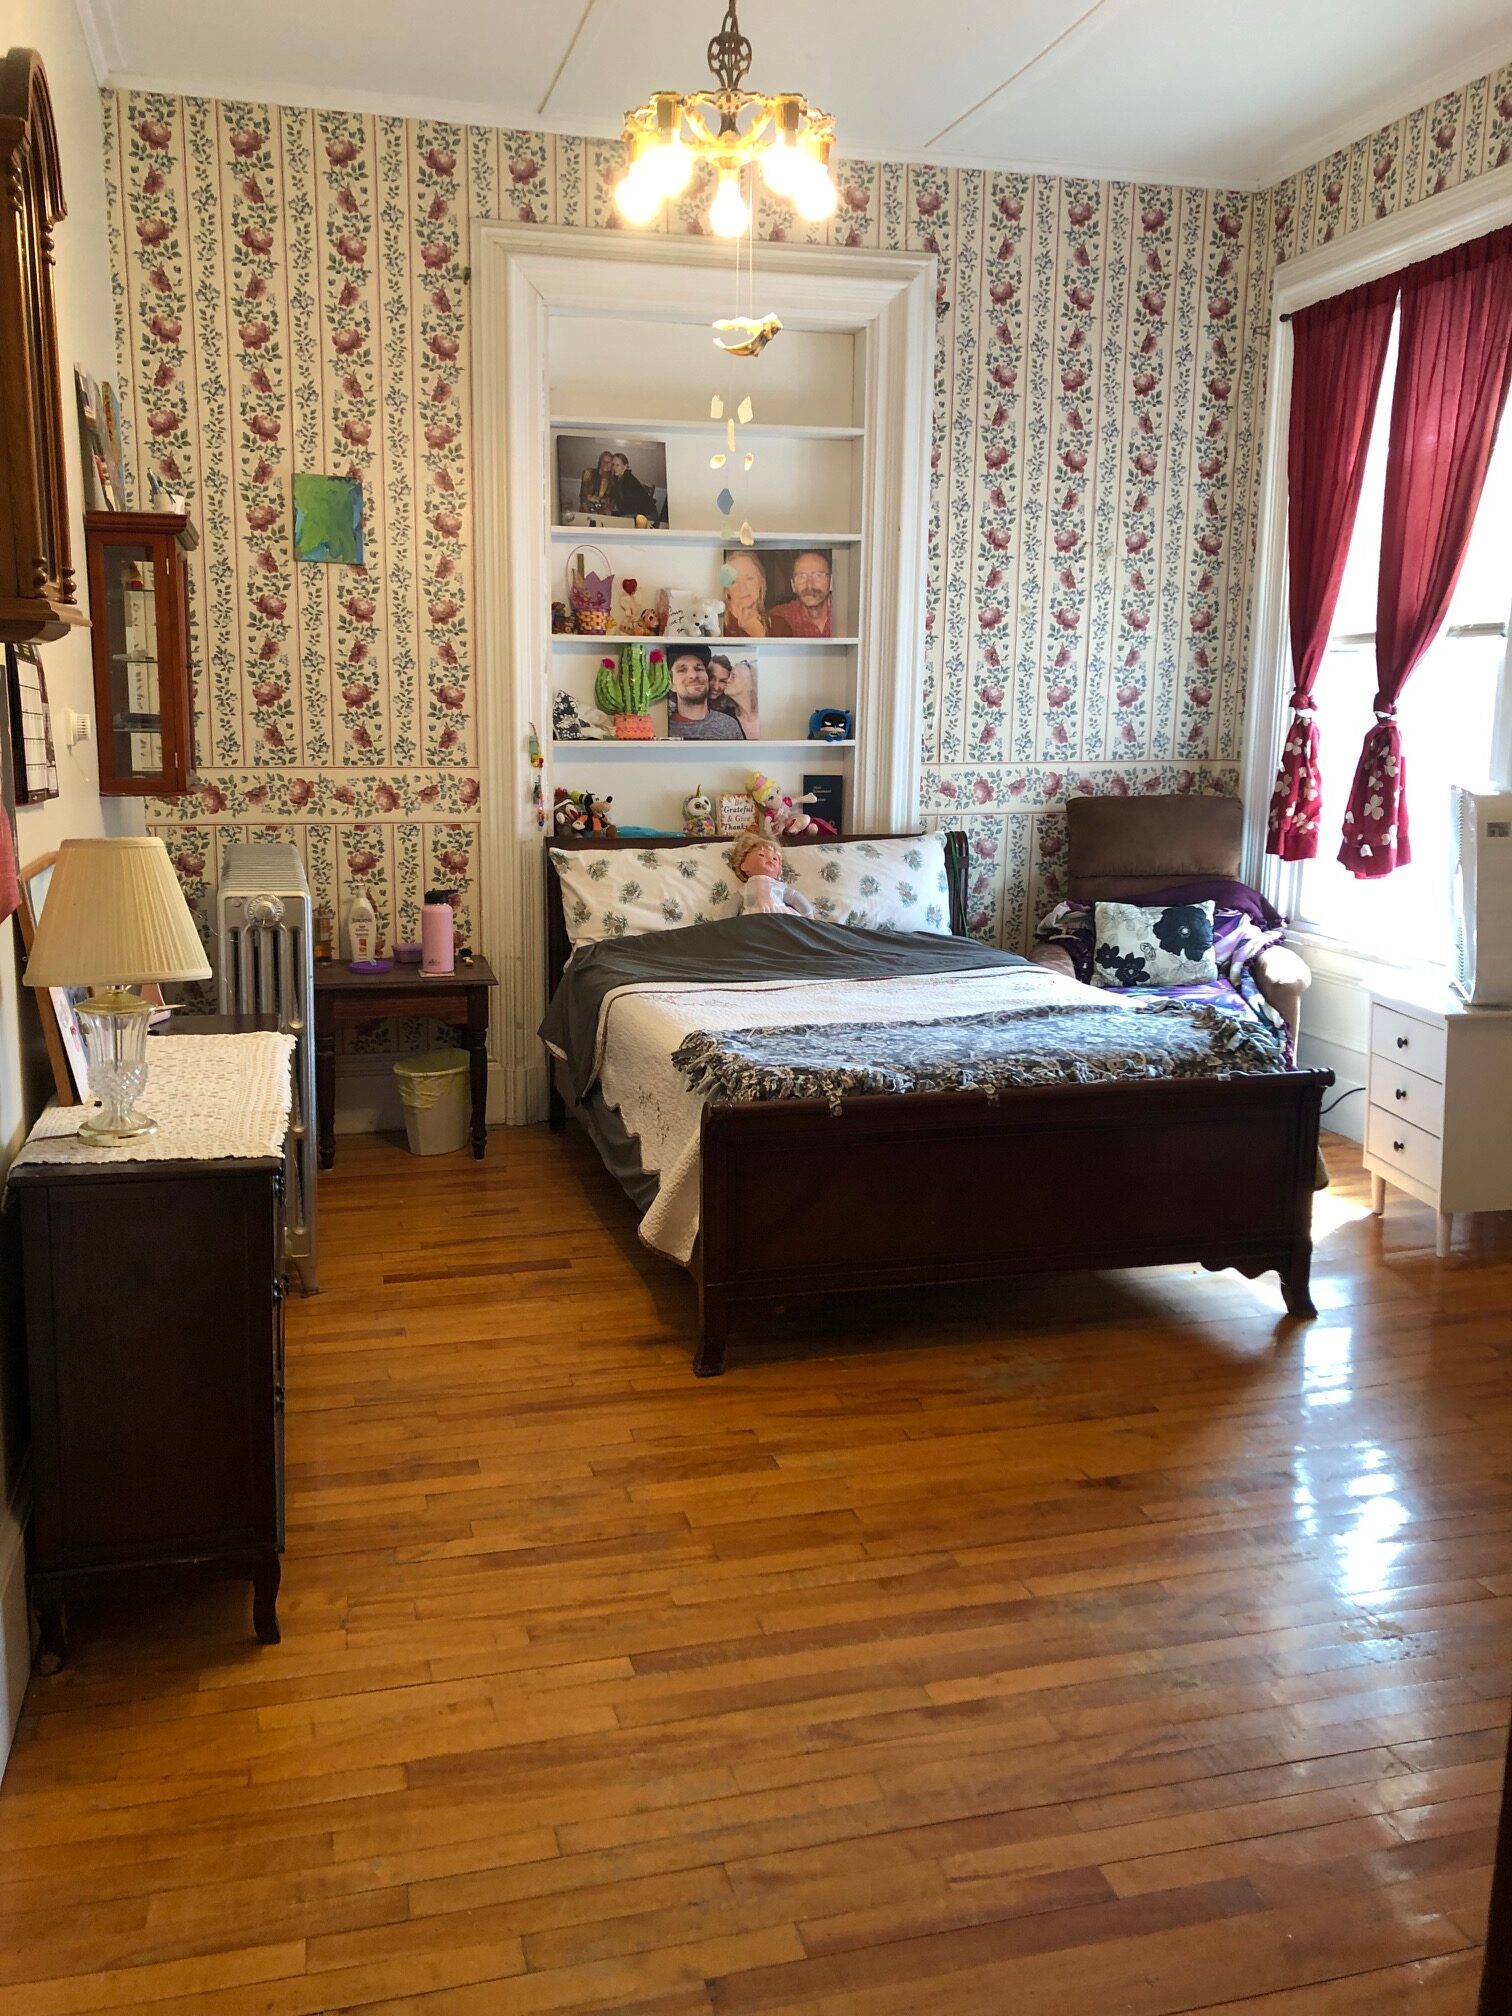 A bedroom decorated in colonial style, with hardwood floors, red and white floral wallpaper, red curtains, and dark brown wooden furniture; behind the bed is a bookshelf with photographs of family and friends